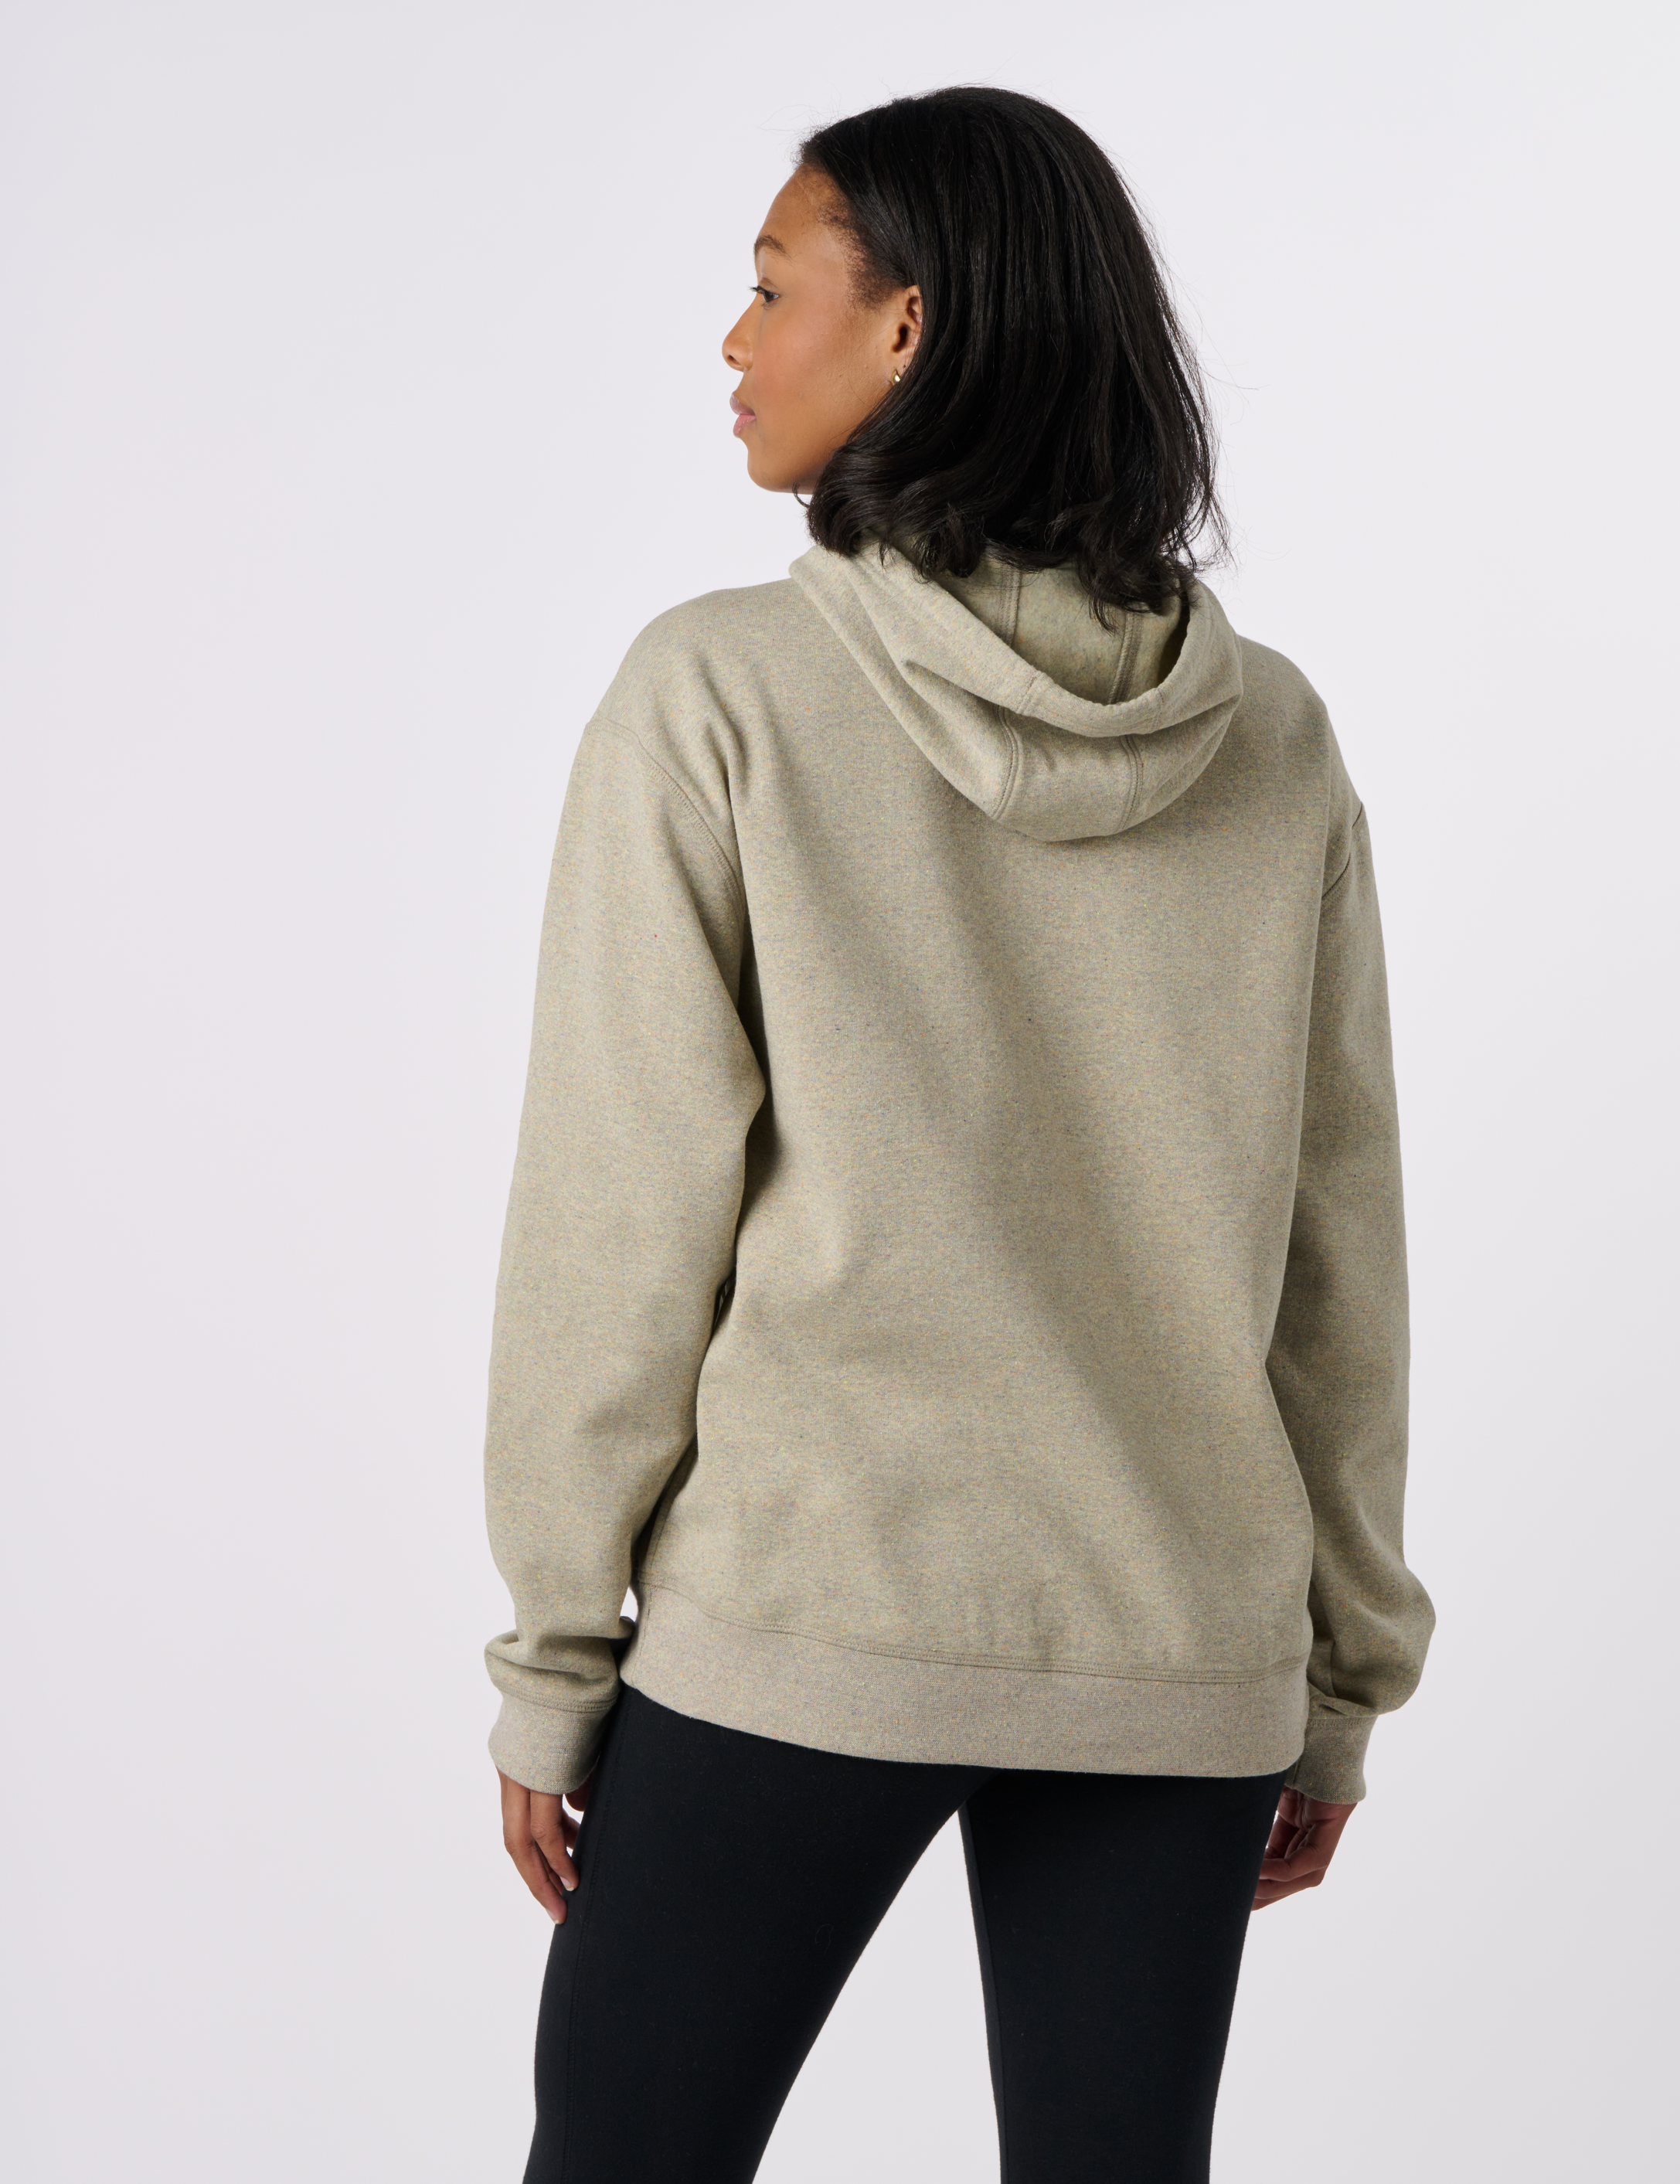 RECOVER_RC1093_UNISEXPULLOVERHOODIE_RAINBOW_BACK_W_99e5acfb-ca37-4b3b-a682-86f9a44eb596.png